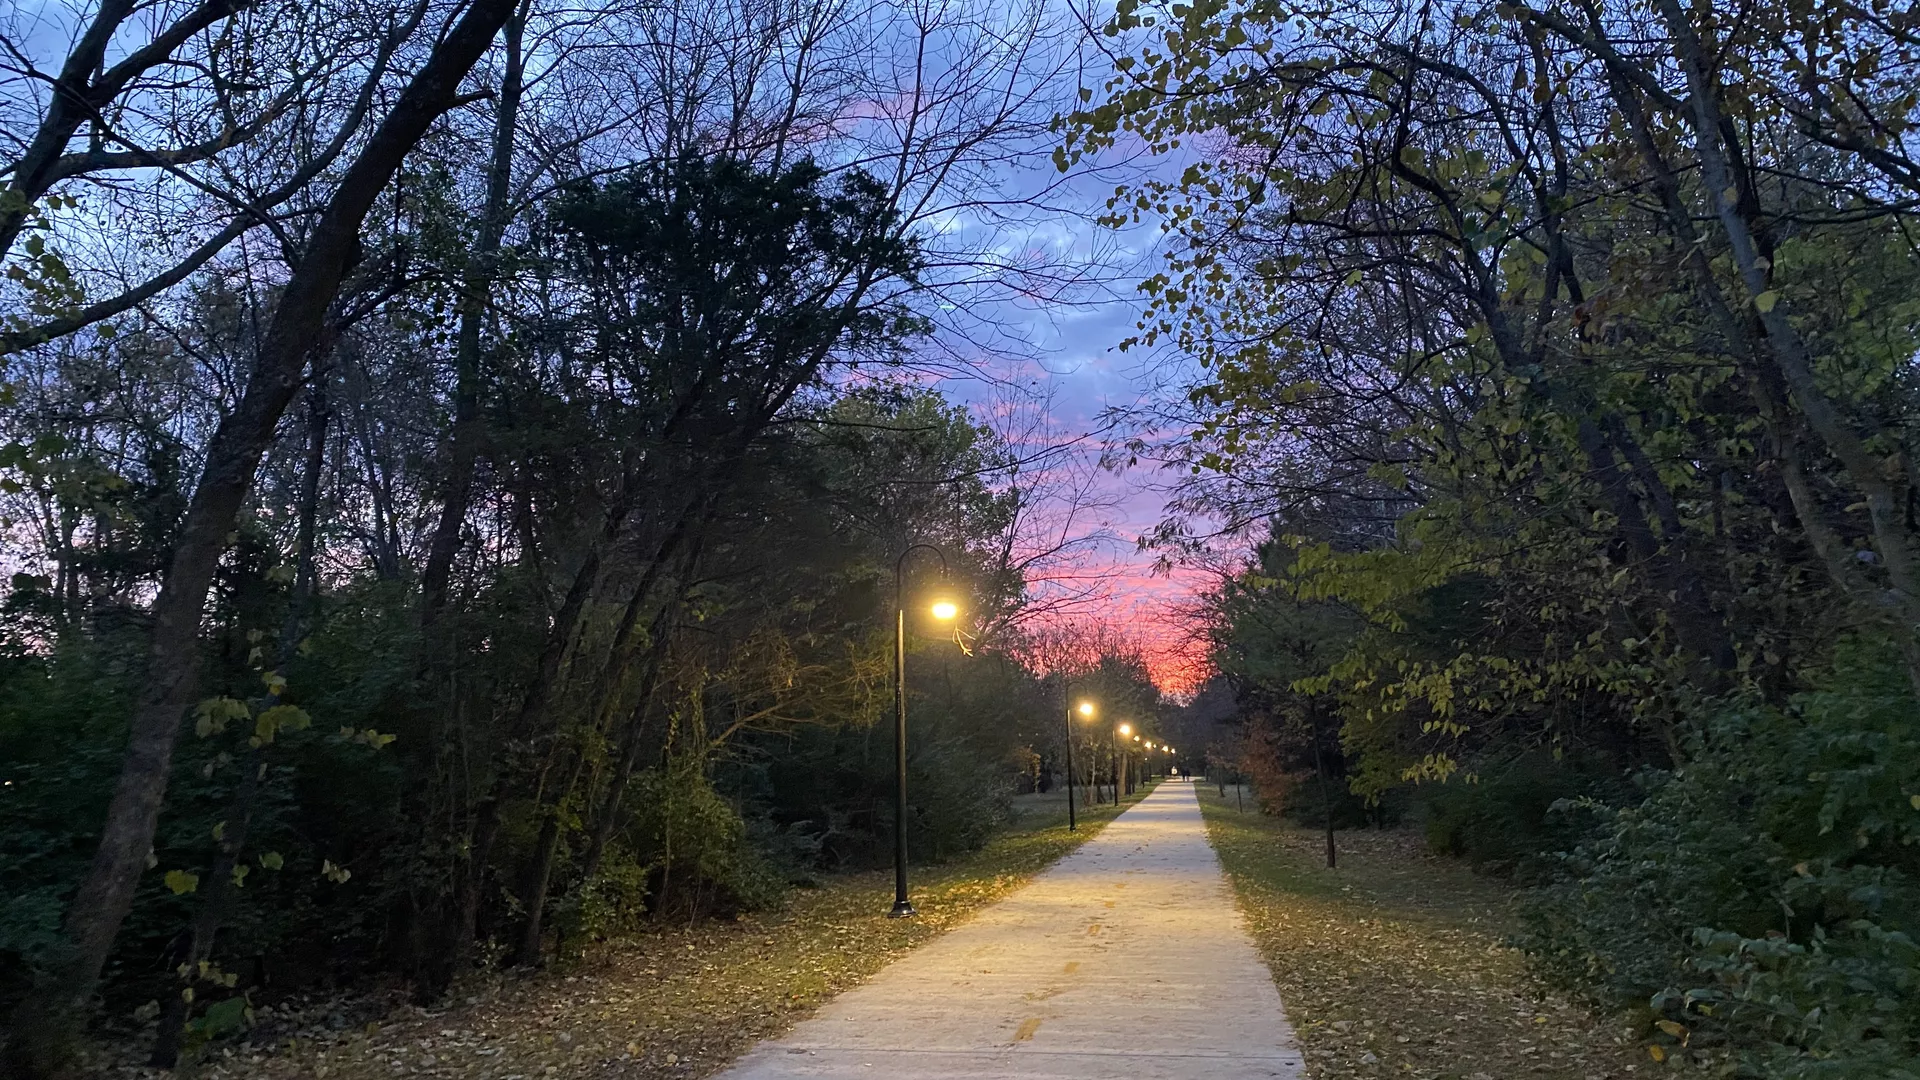 The Gulley Park trail at dusk